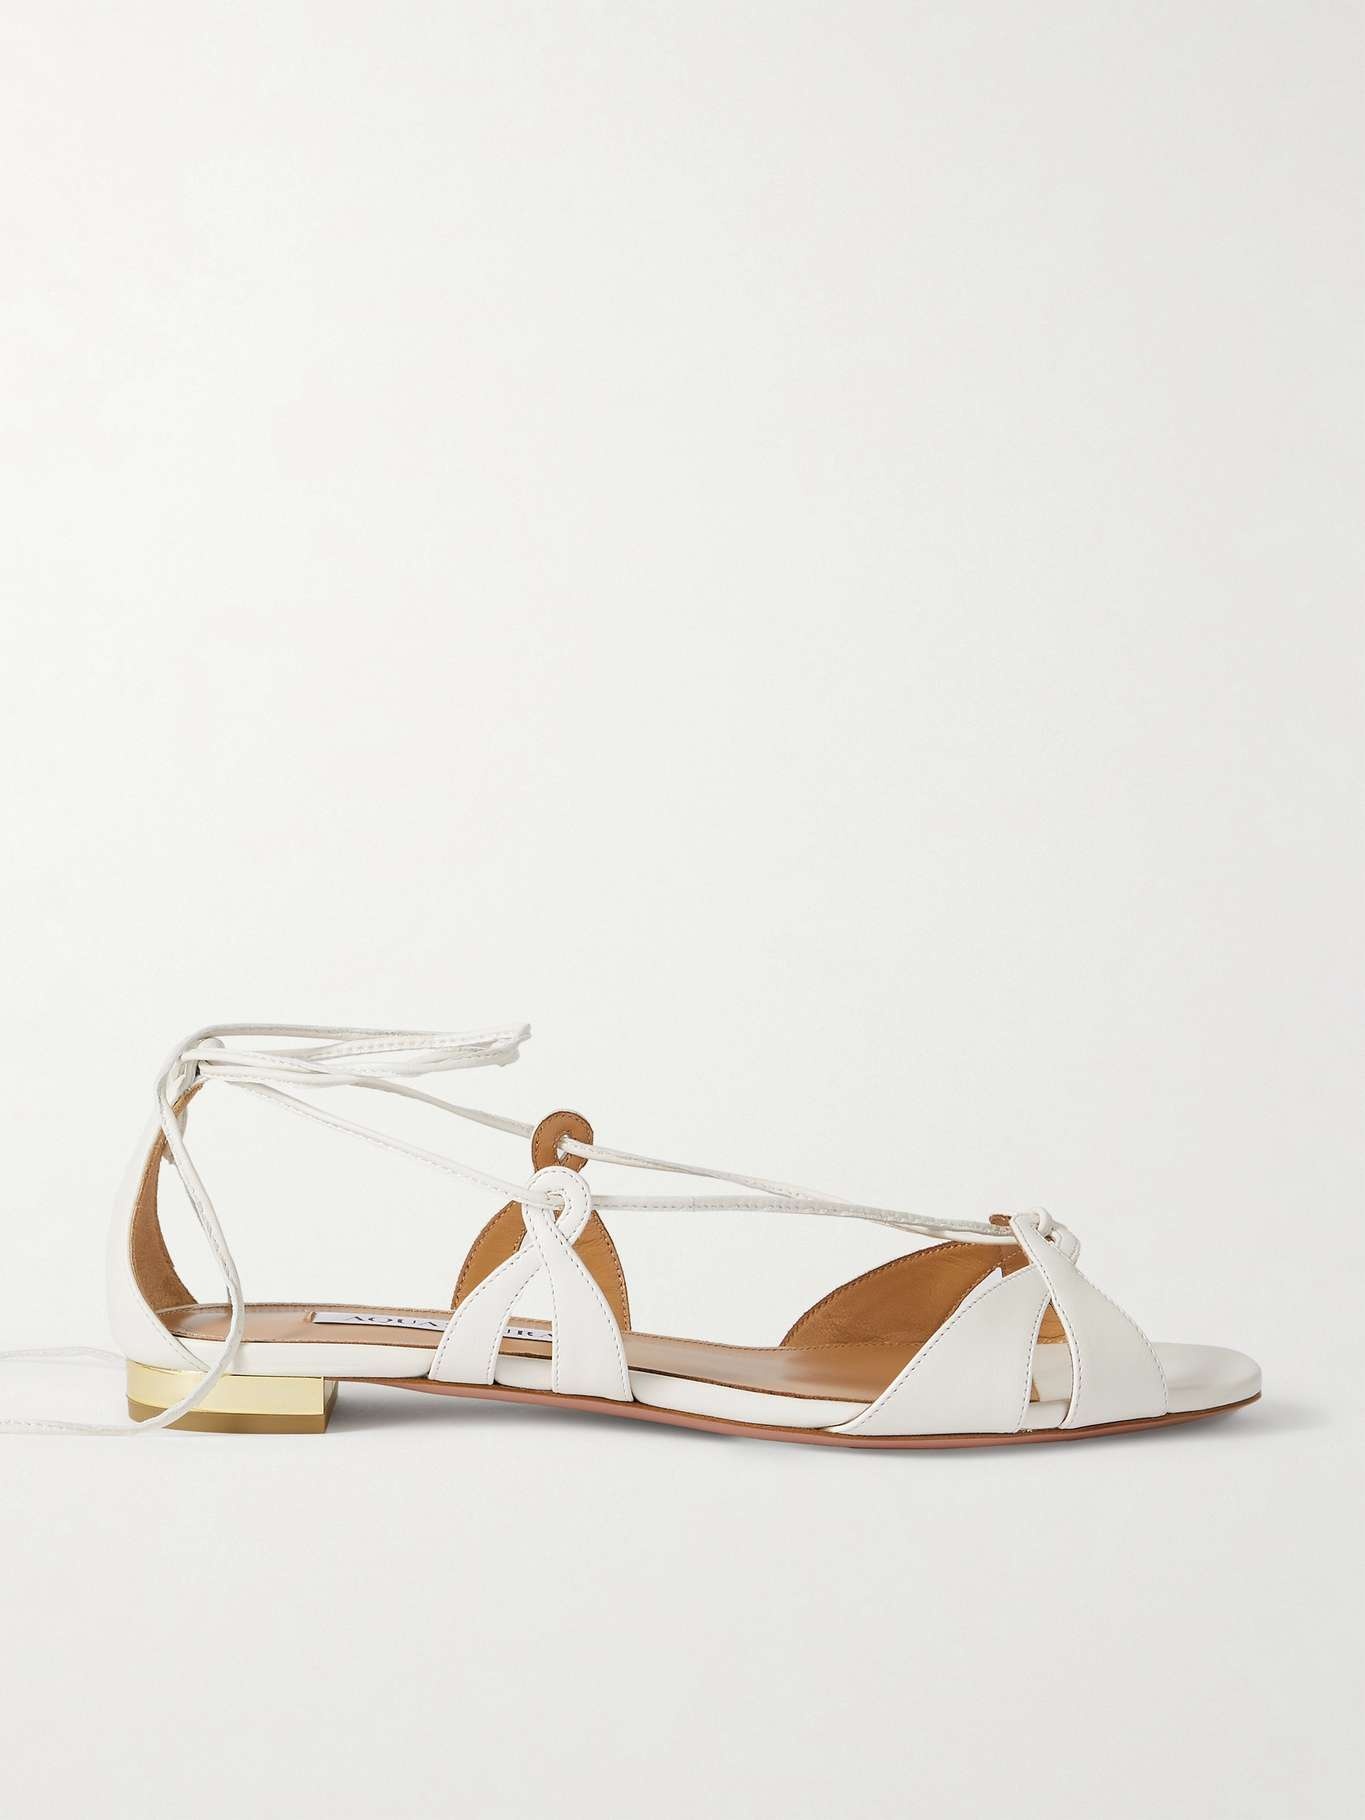 Cala di Volpe leather sandals - 1